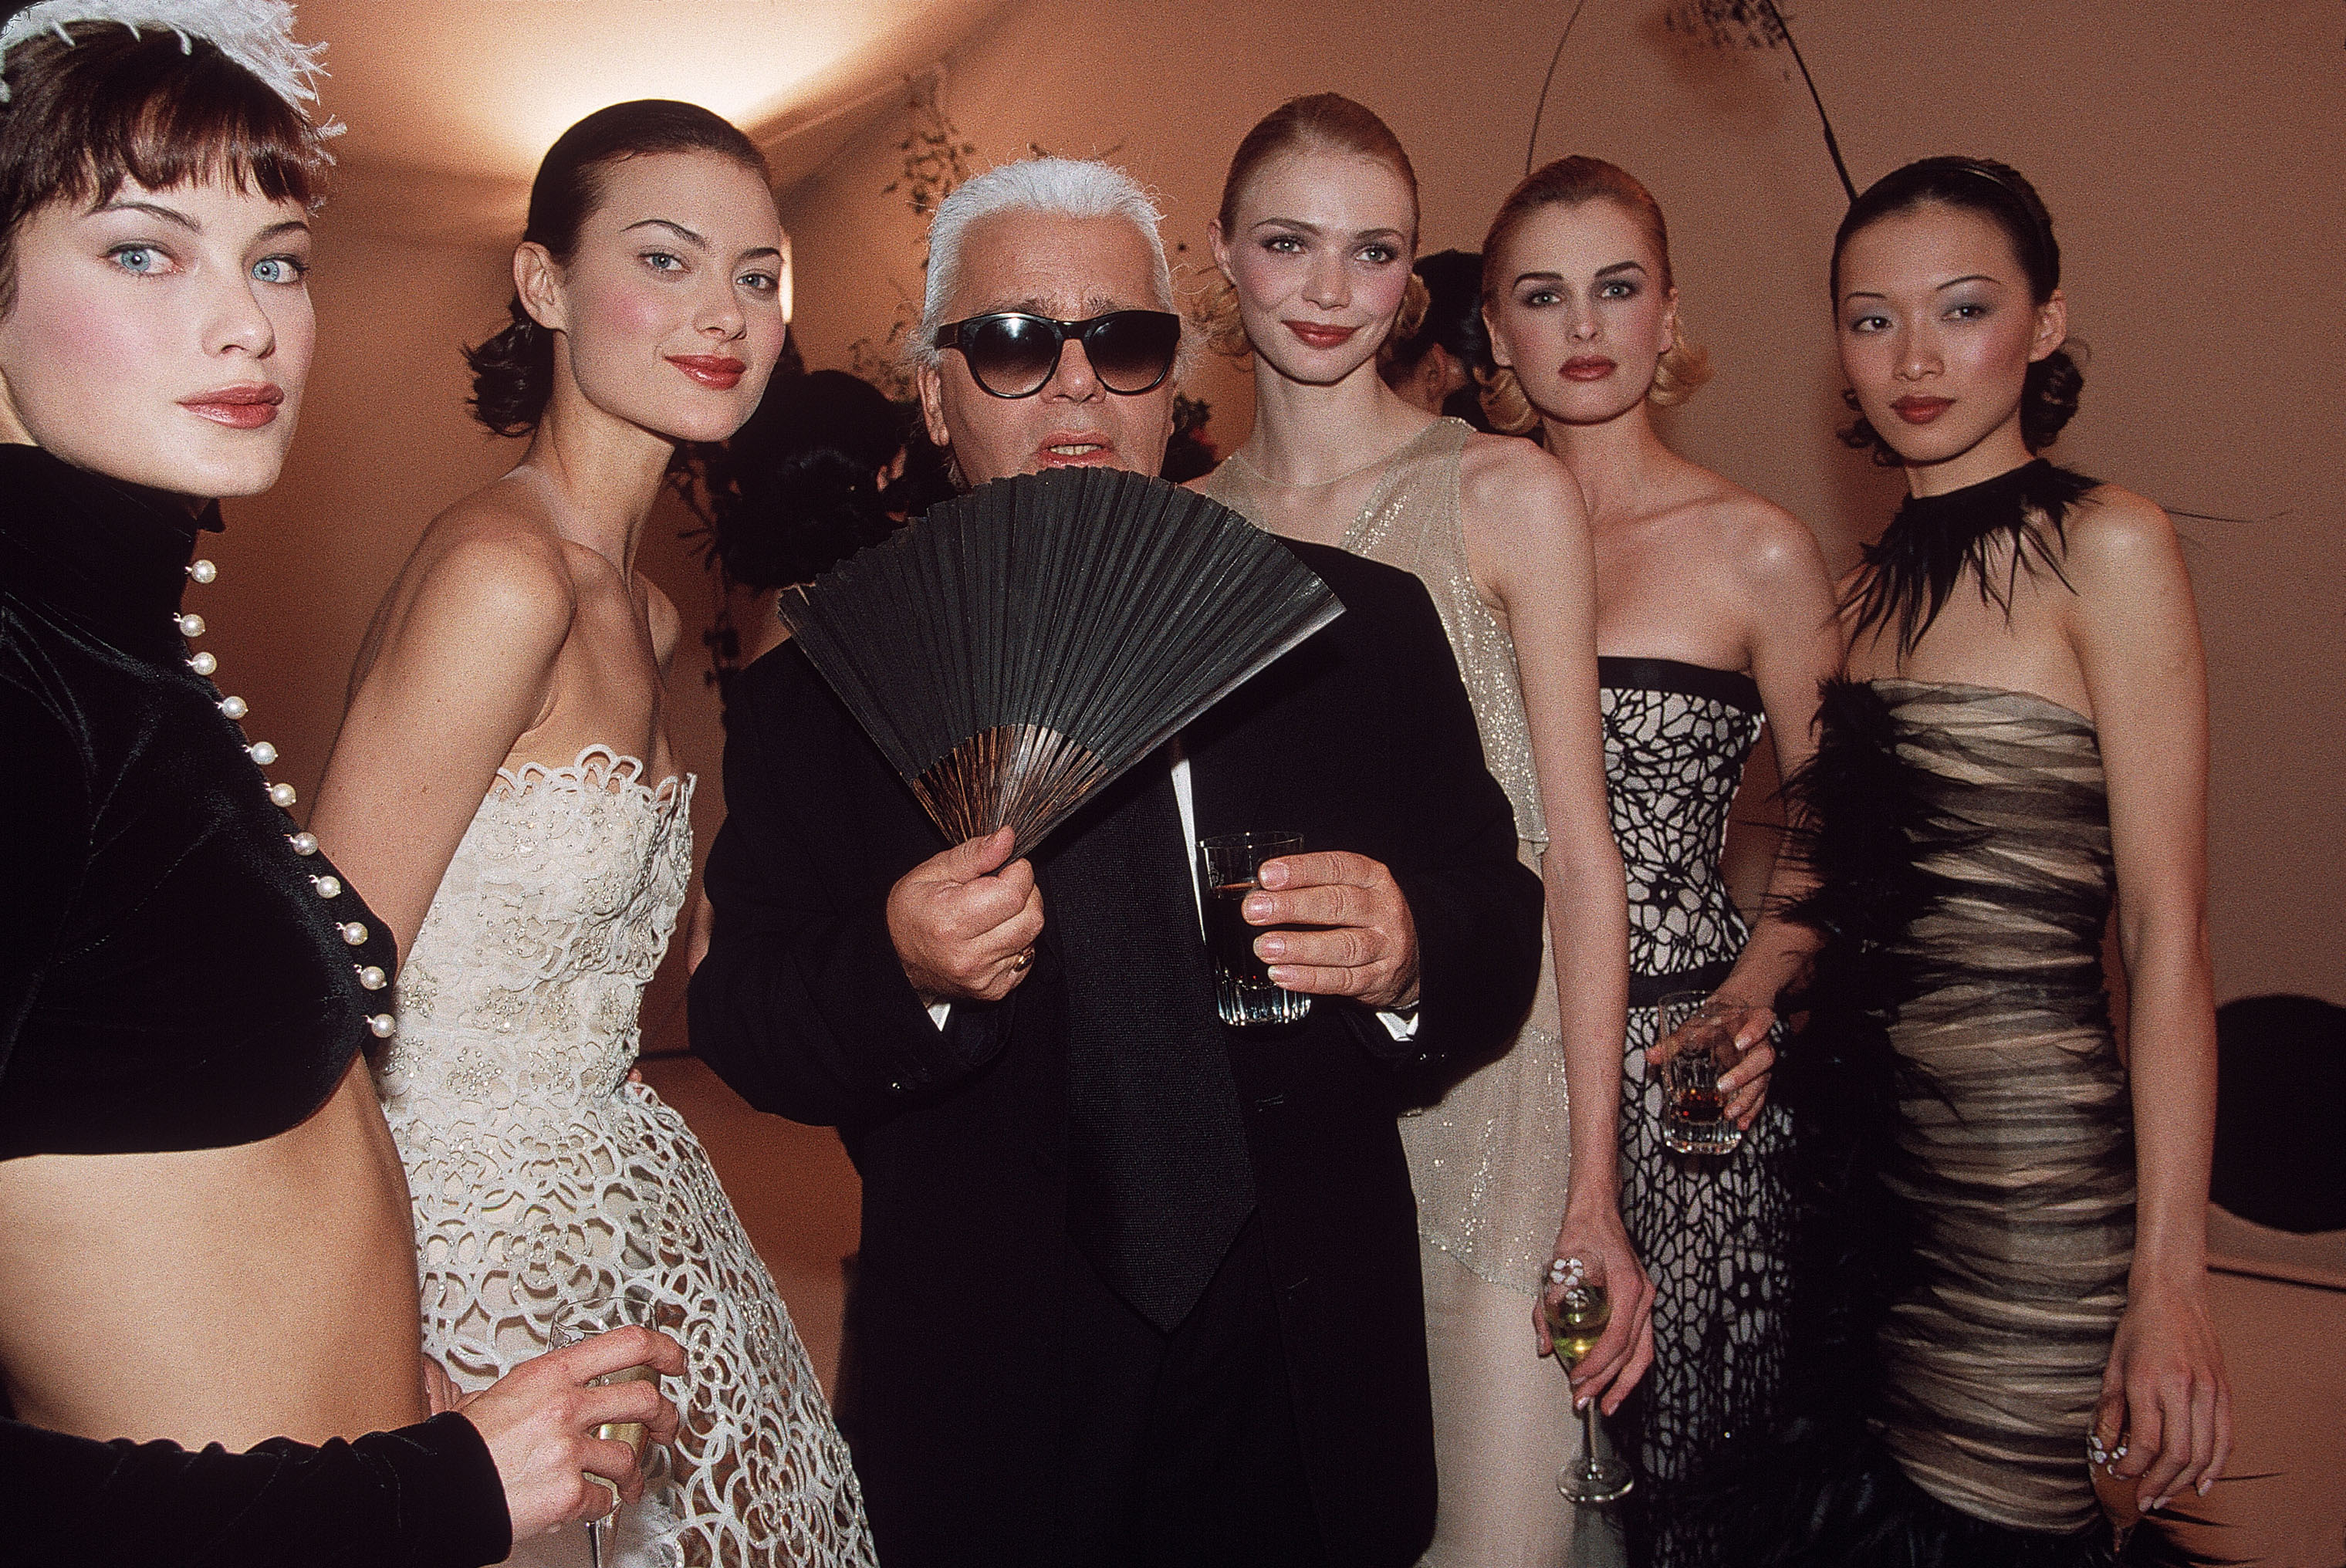 Karl Lagerfeld at the Chanel Summer 1997 Collection fashion show. (A. Abbas—Magnum Photos)